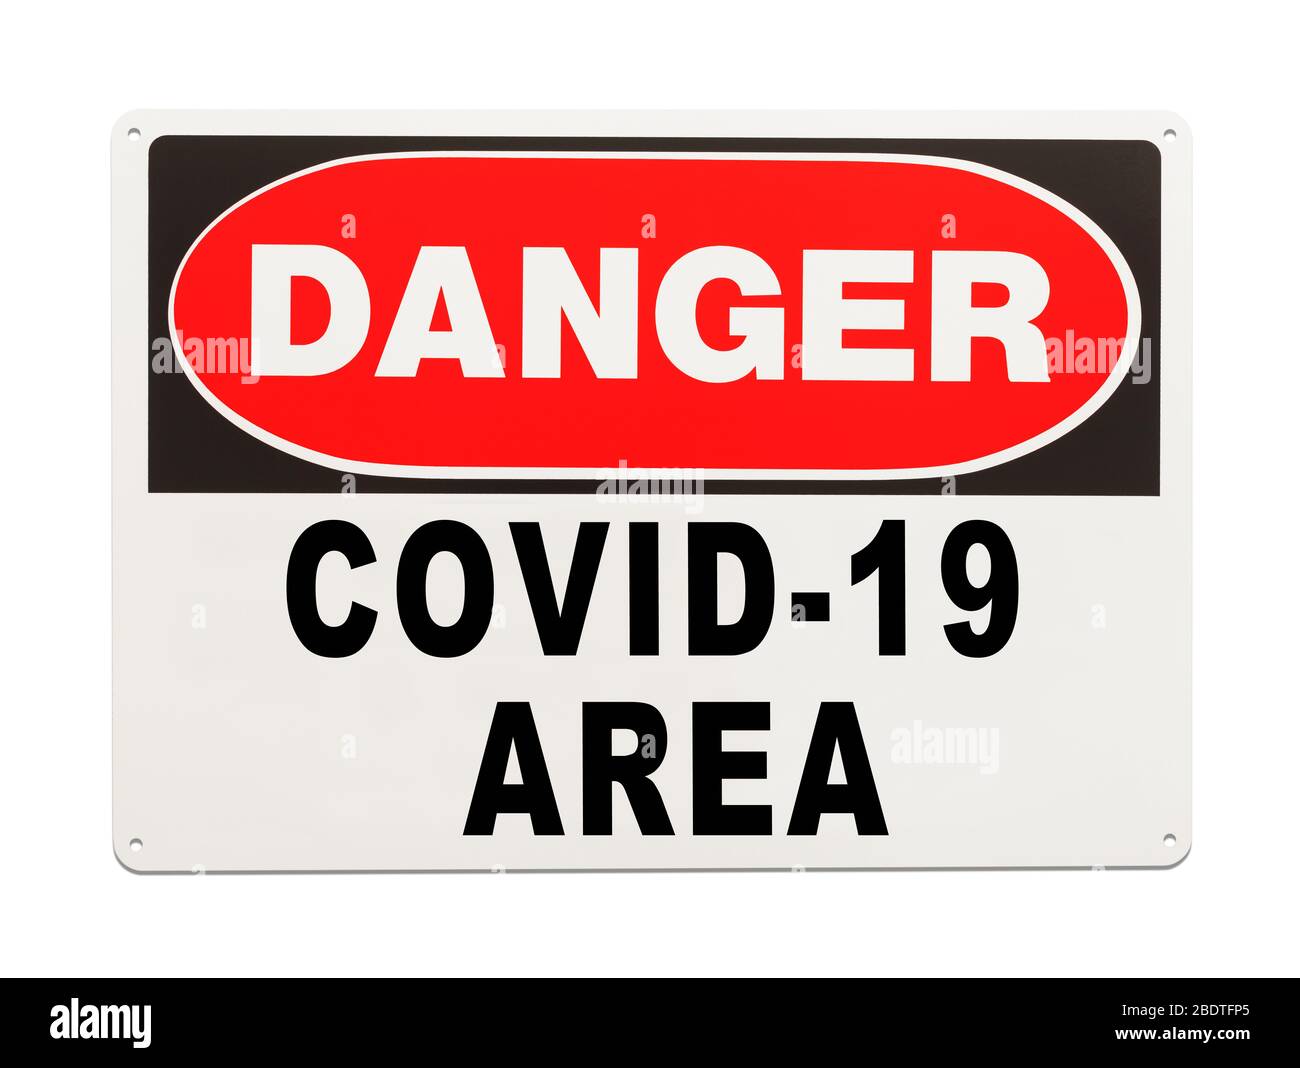 Danger COVID-19 Area Sign Isolated on White Background. Stock Photo